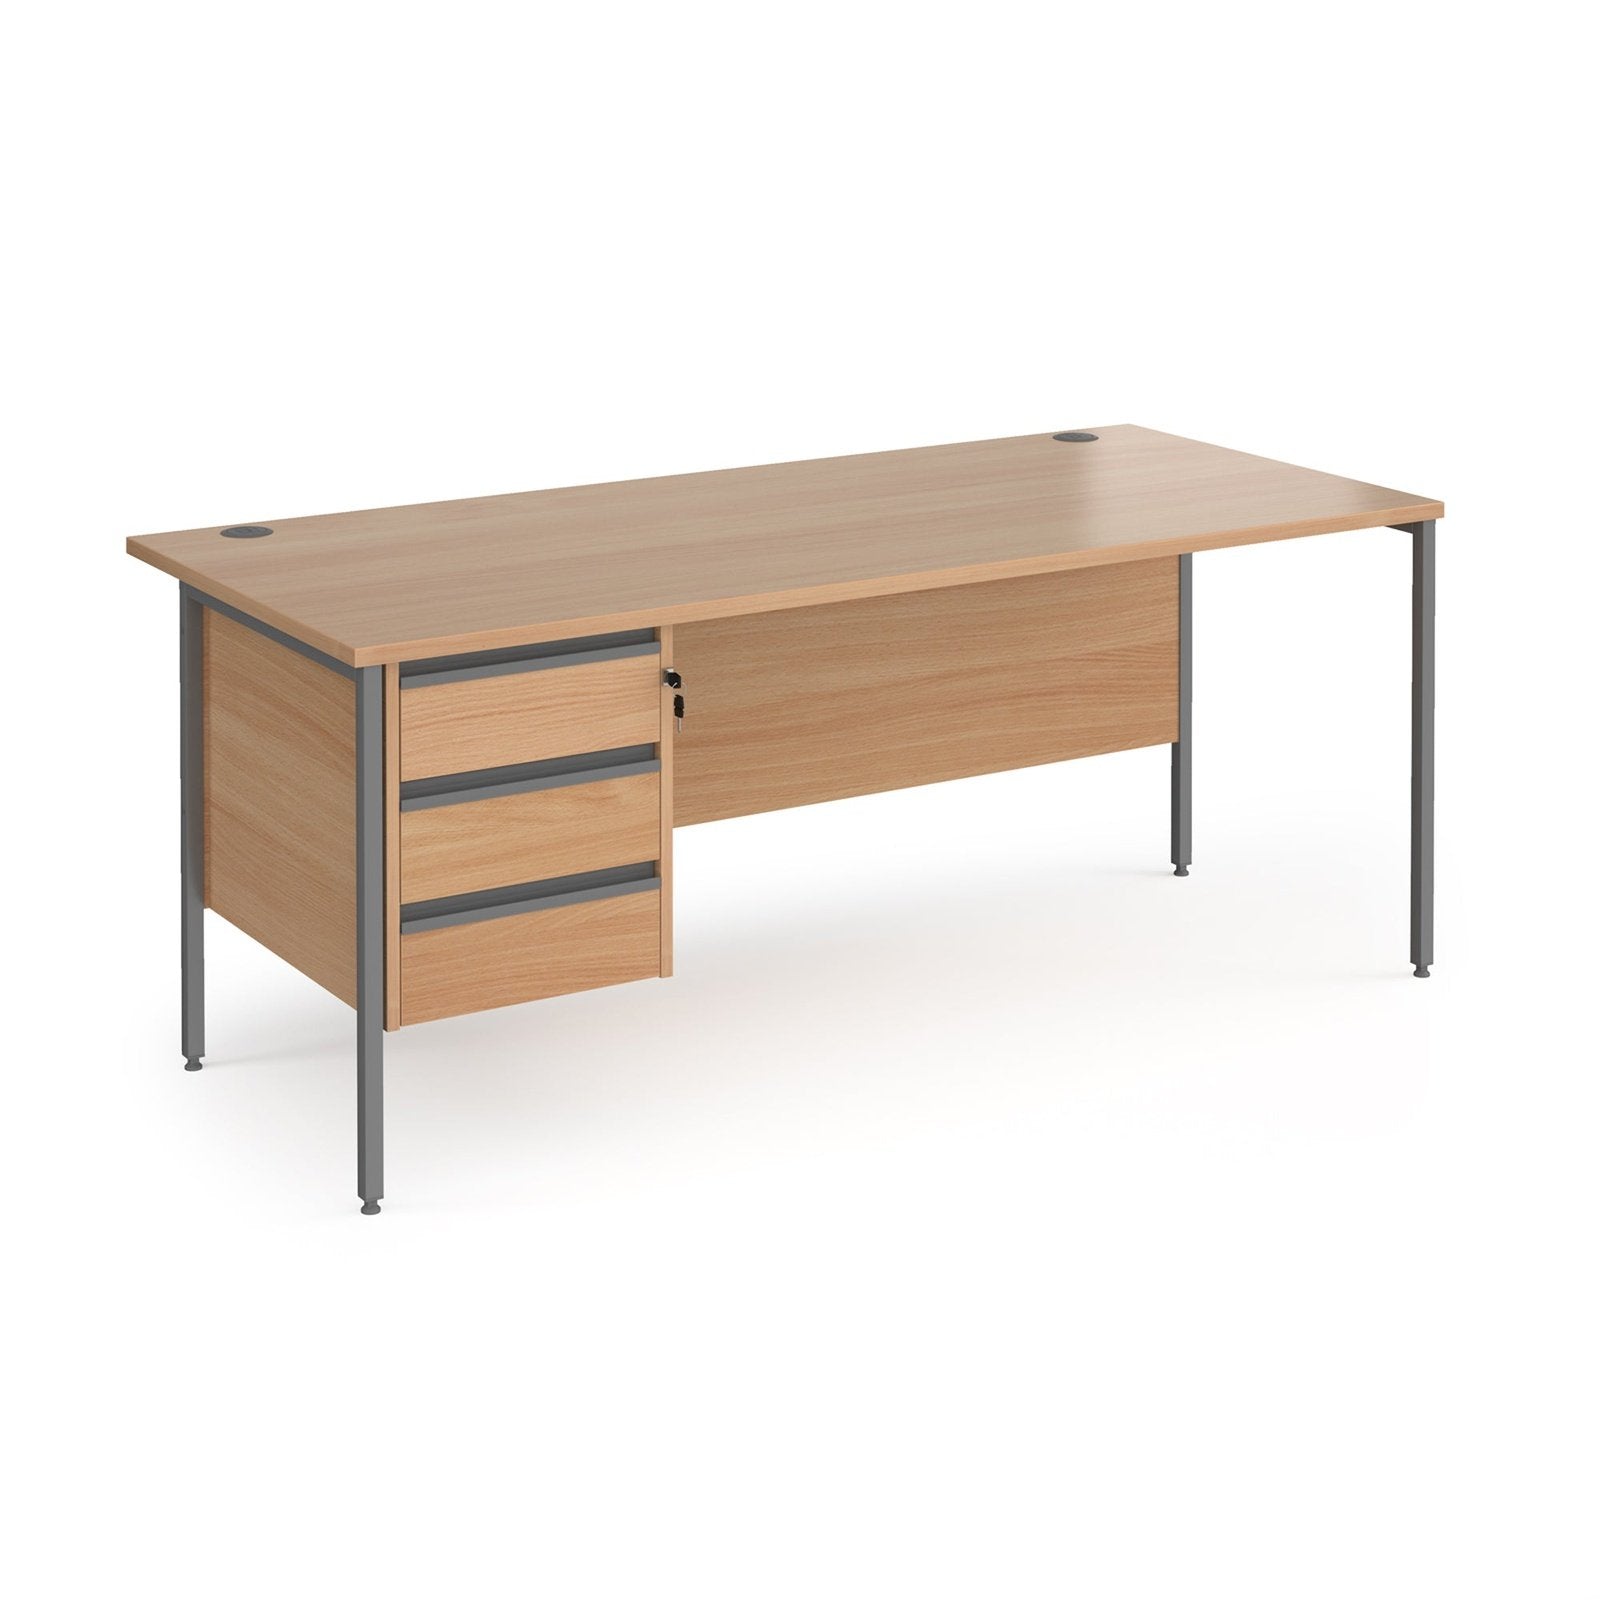 Contract 25 straight desk with 3 drawer pedestal and H-Frame leg - Office Products Online